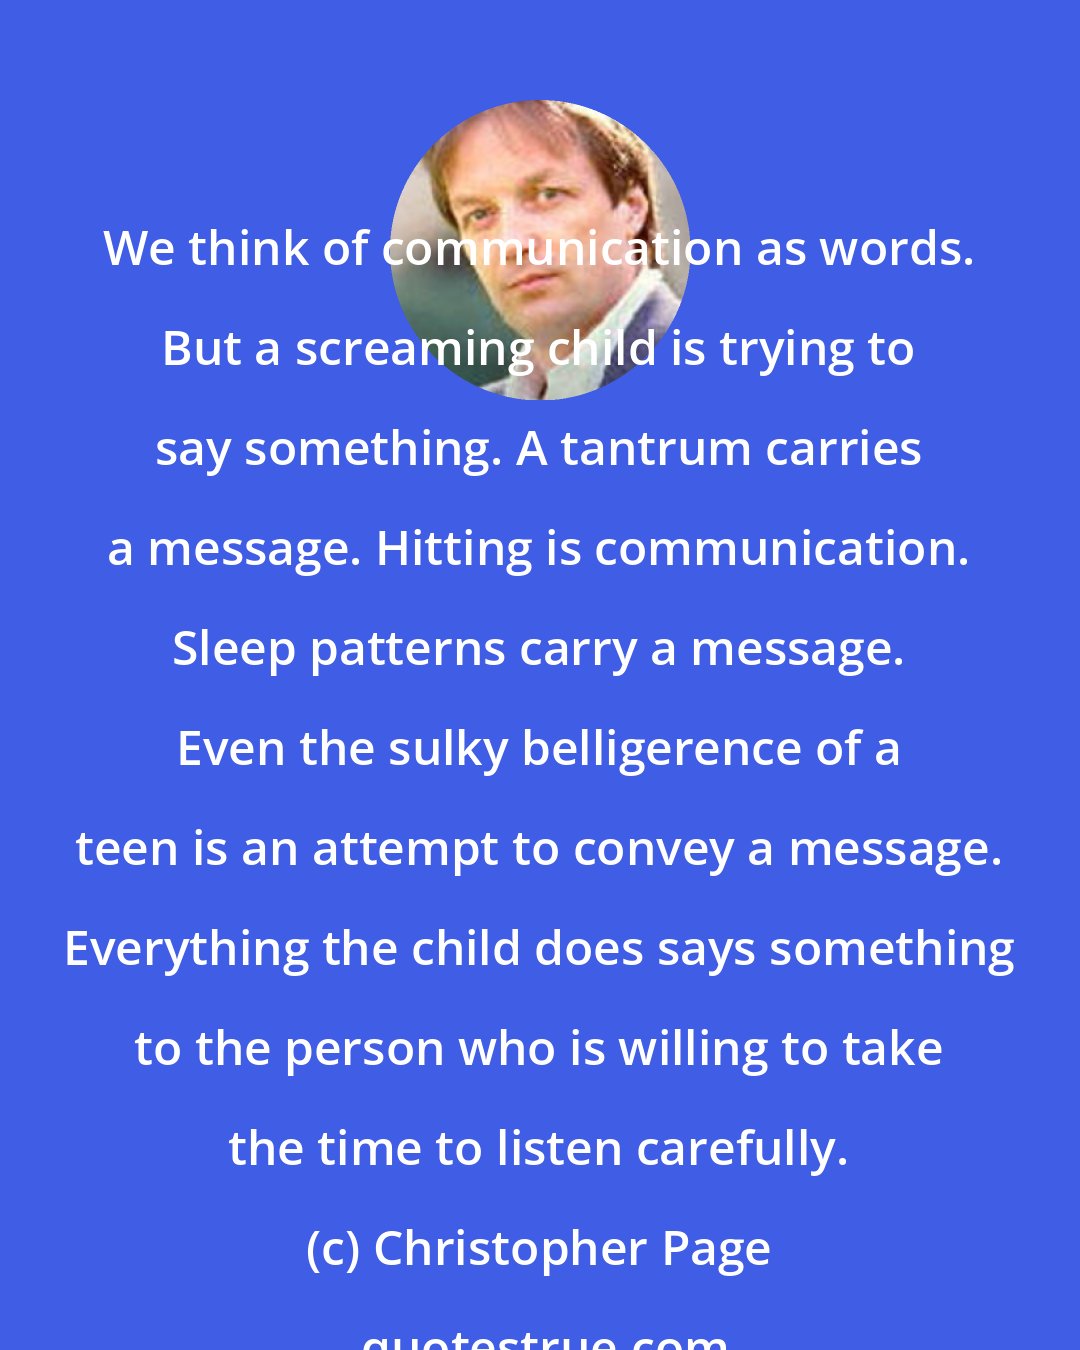 Christopher Page: We think of communication as words. But a screaming child is trying to say something. A tantrum carries a message. Hitting is communication. Sleep patterns carry a message. Even the sulky belligerence of a teen is an attempt to convey a message. Everything the child does says something to the person who is willing to take the time to listen carefully.